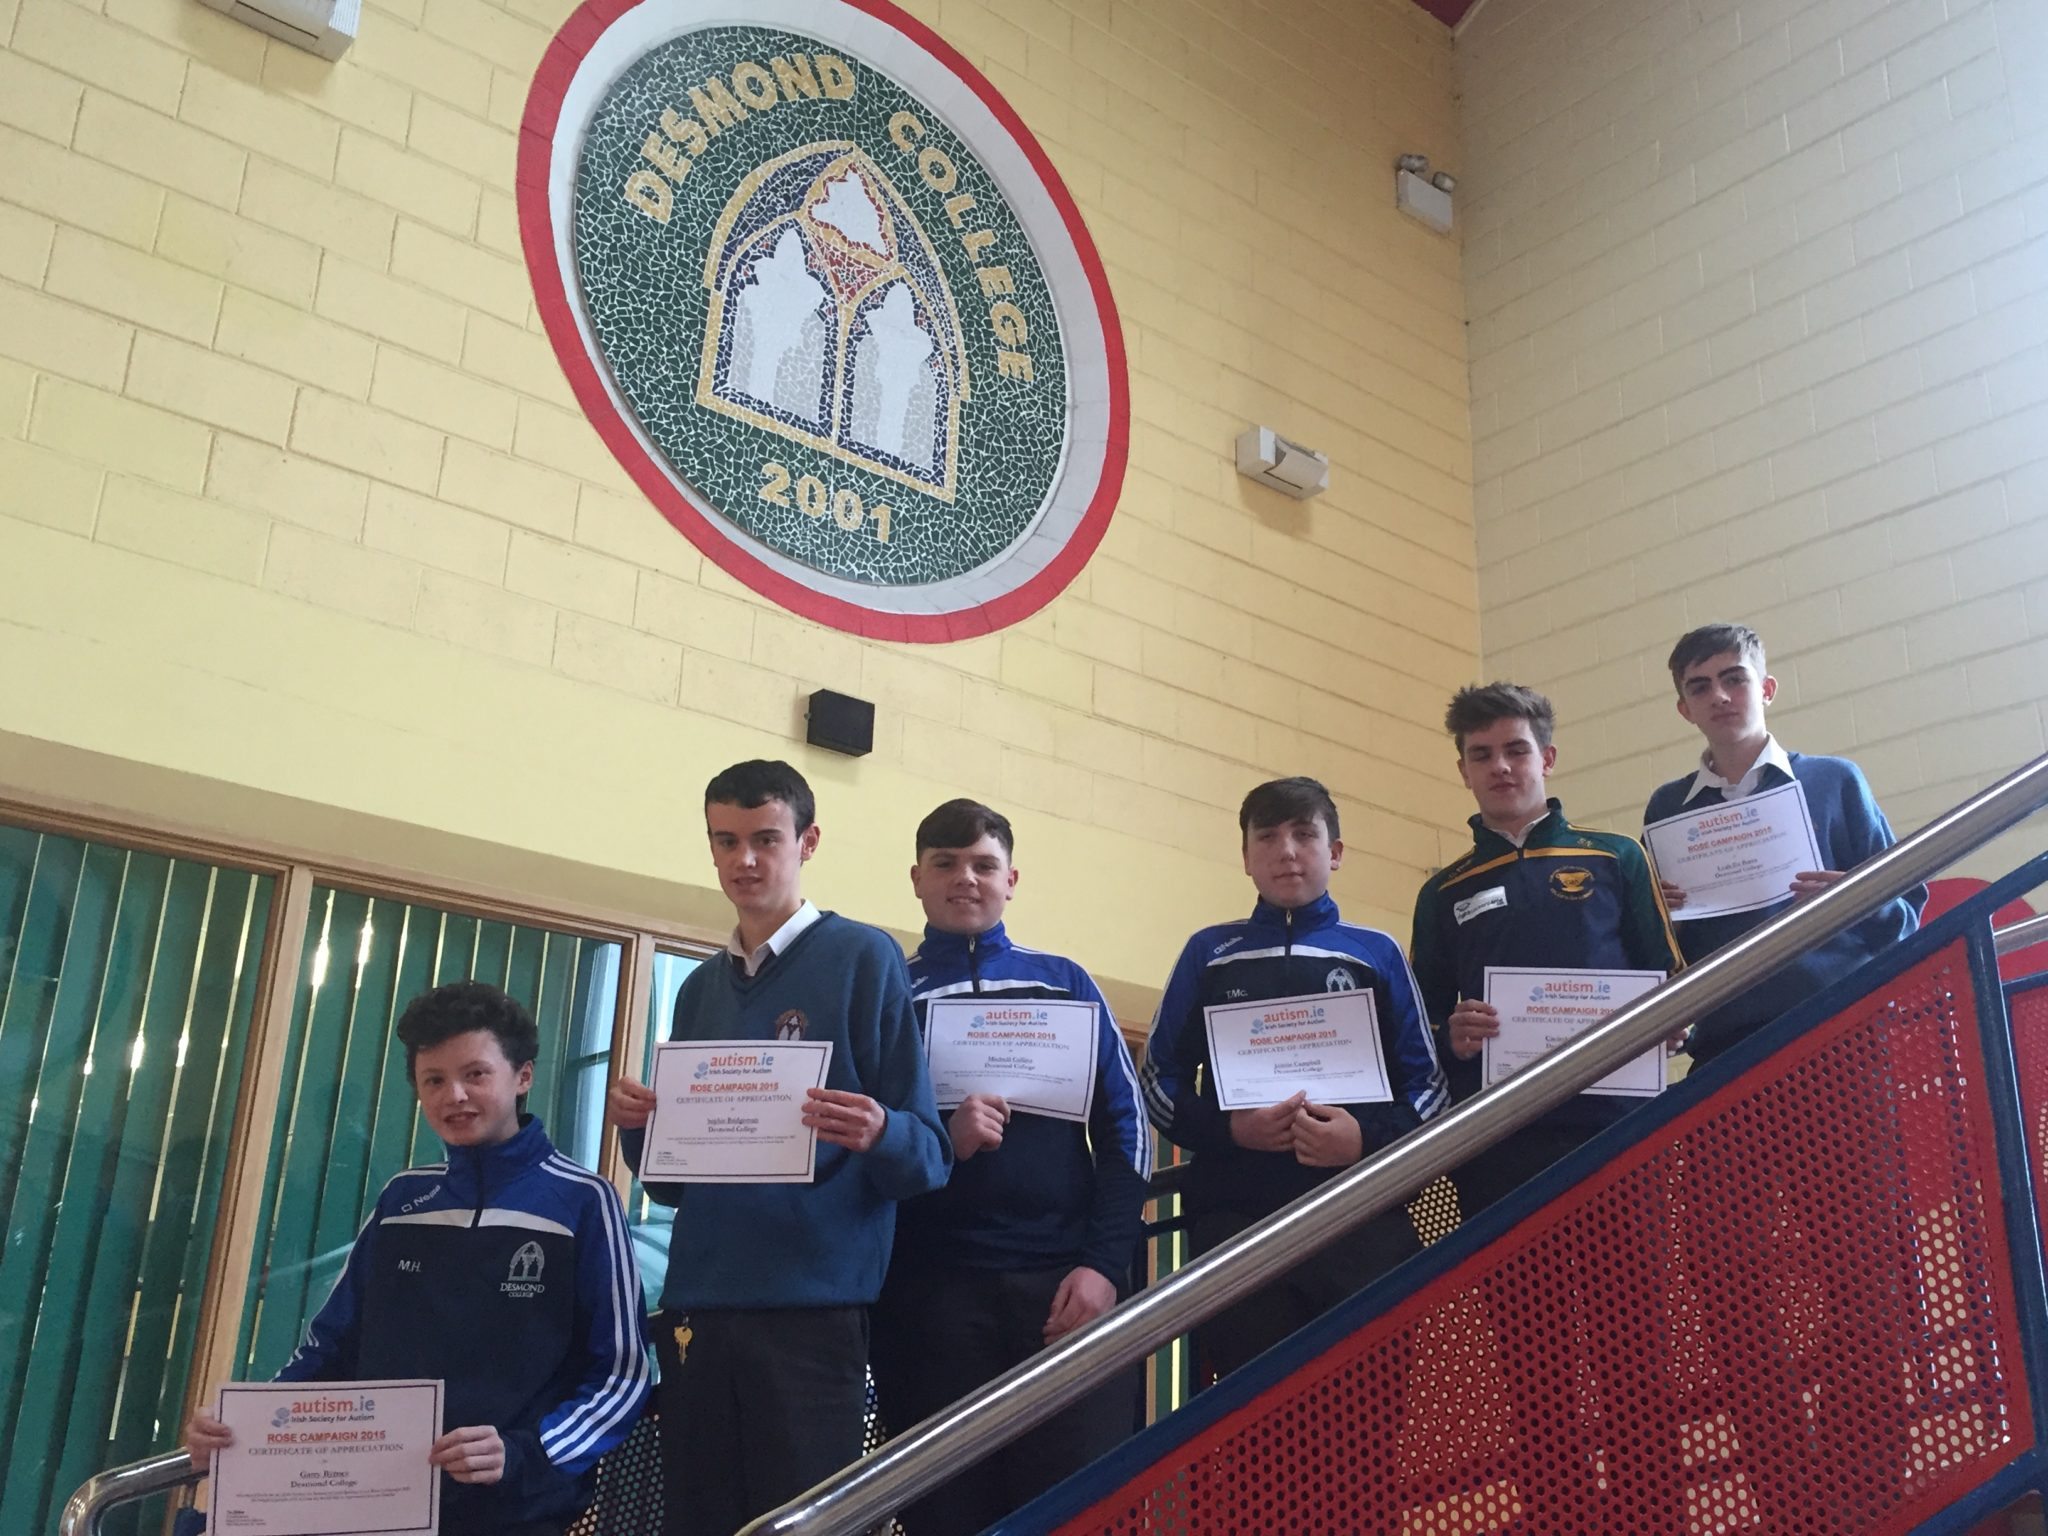 November 2015: Desmond College TY Students from NewcastleWest Co Limerick, involved in the Rose Campaign raising money for autism